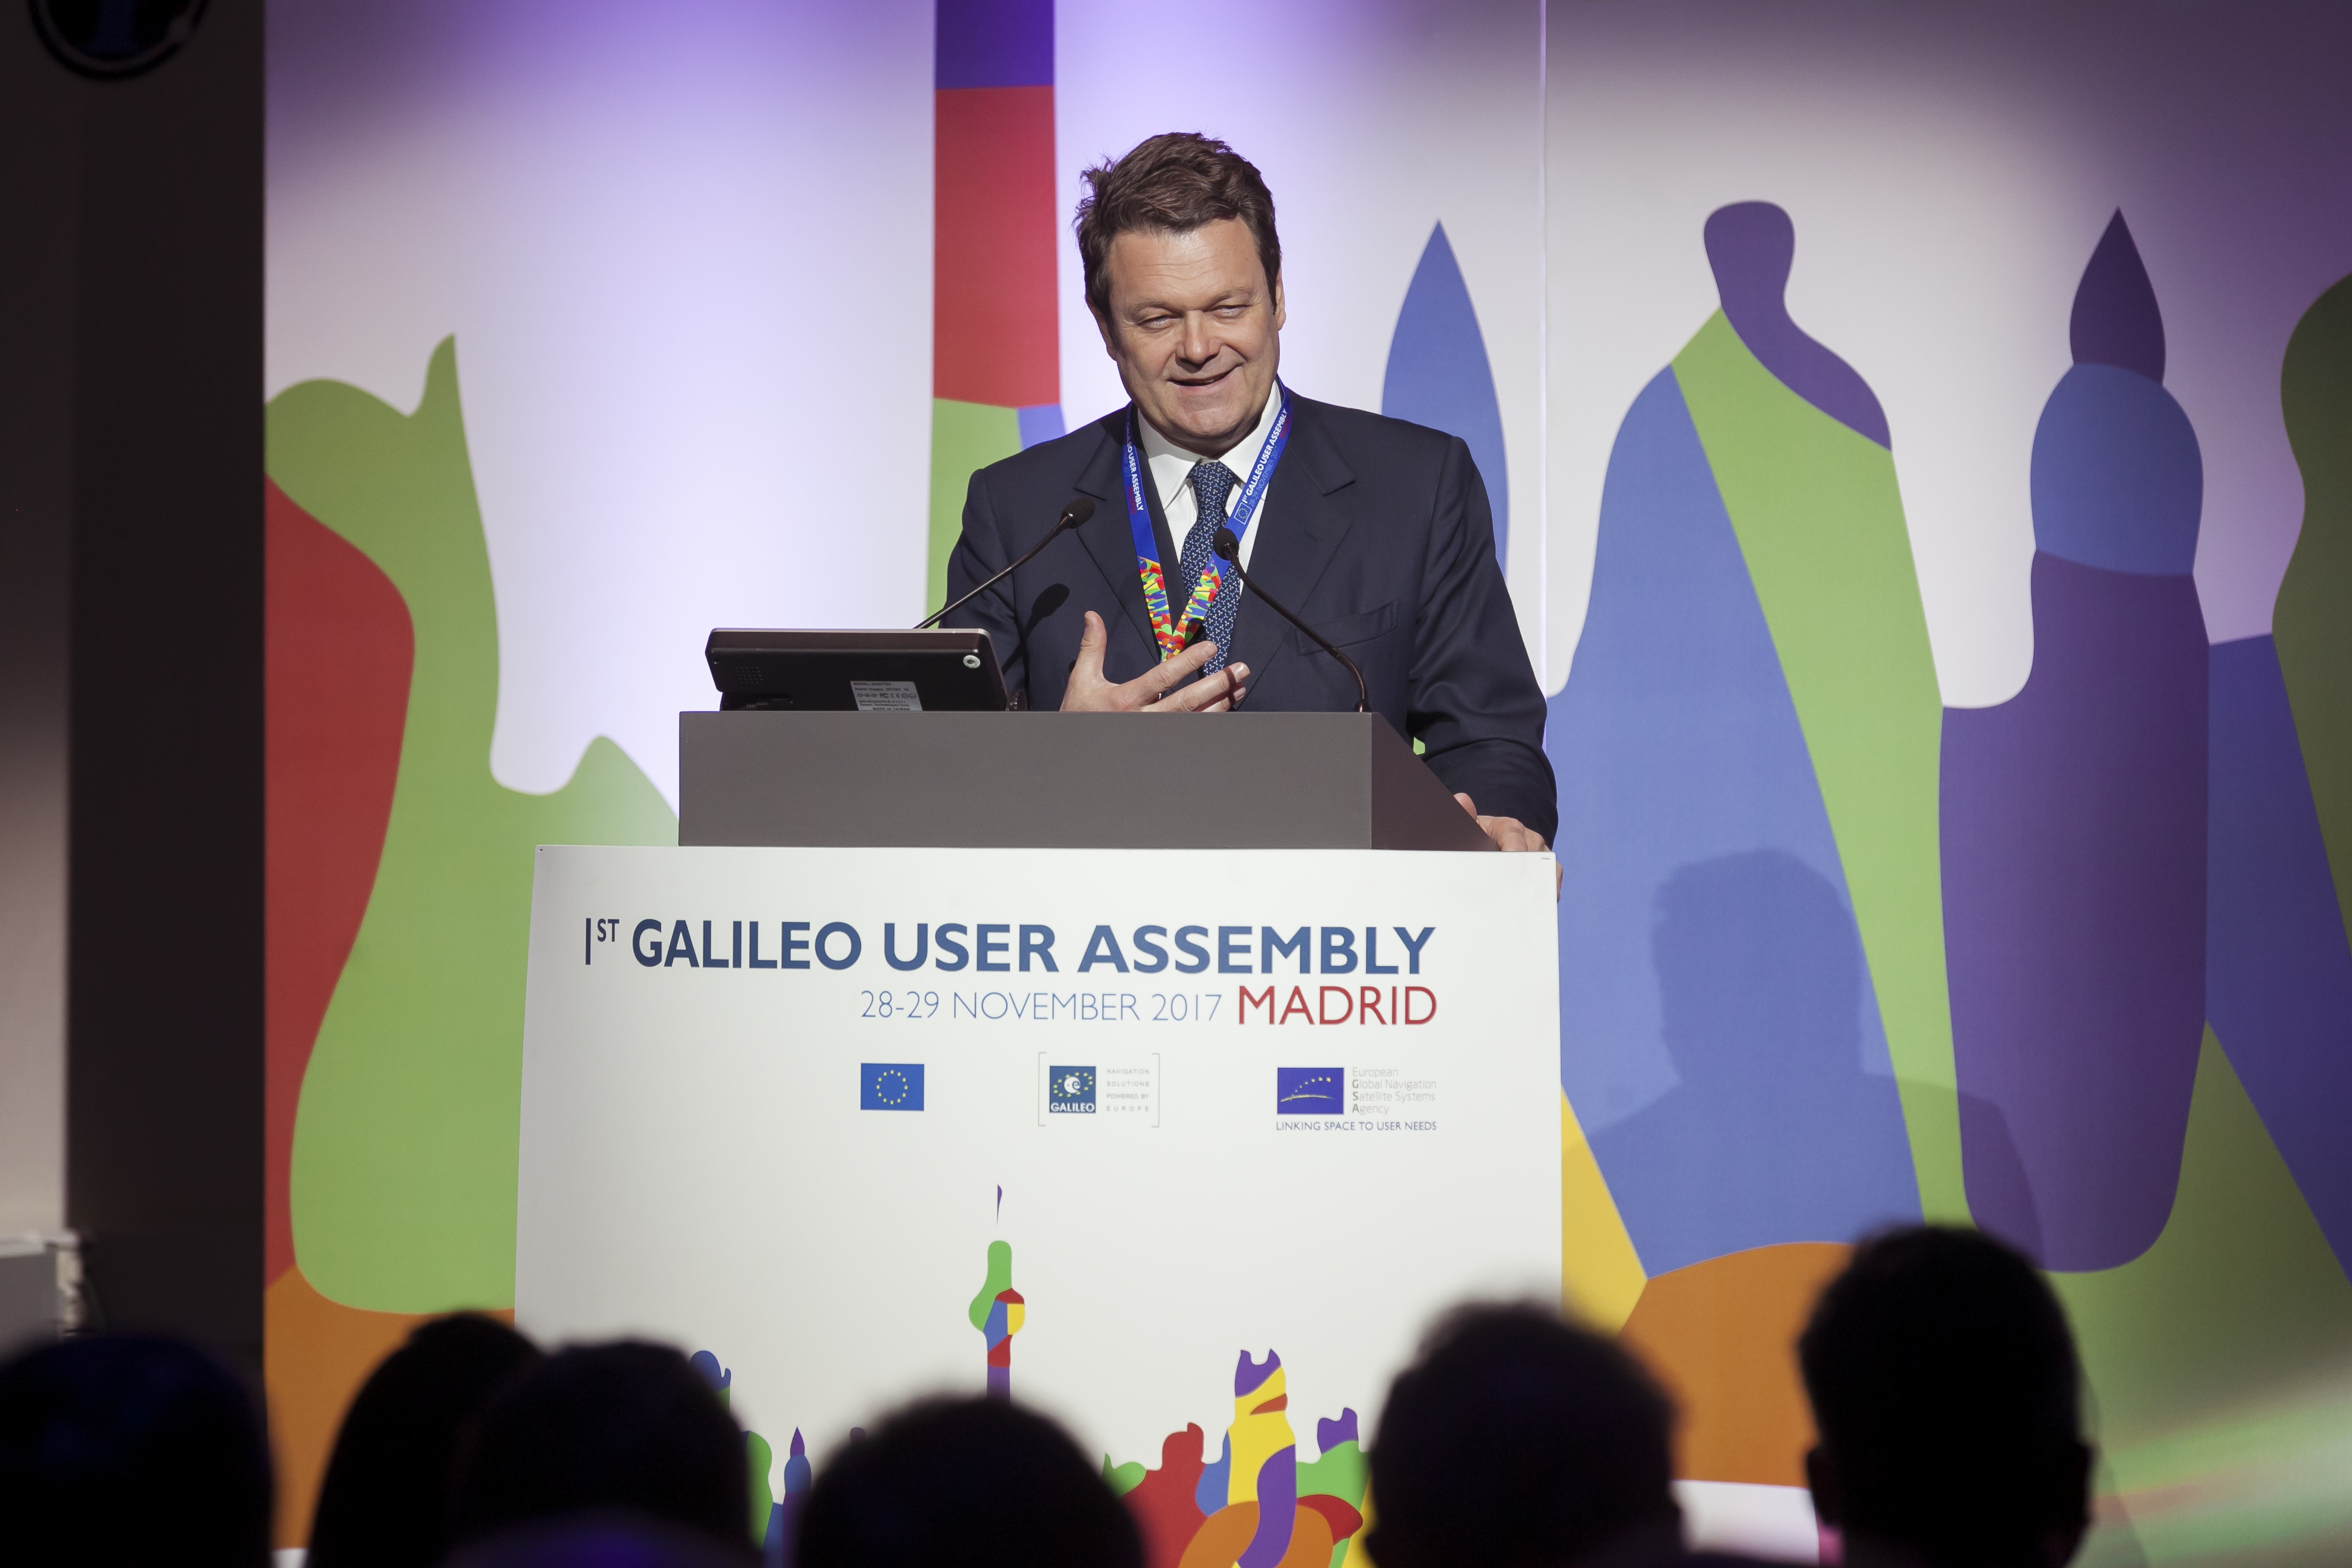 The 1st Galileo User Assembly was opened by GSA Exec Director Carlo des Dorides